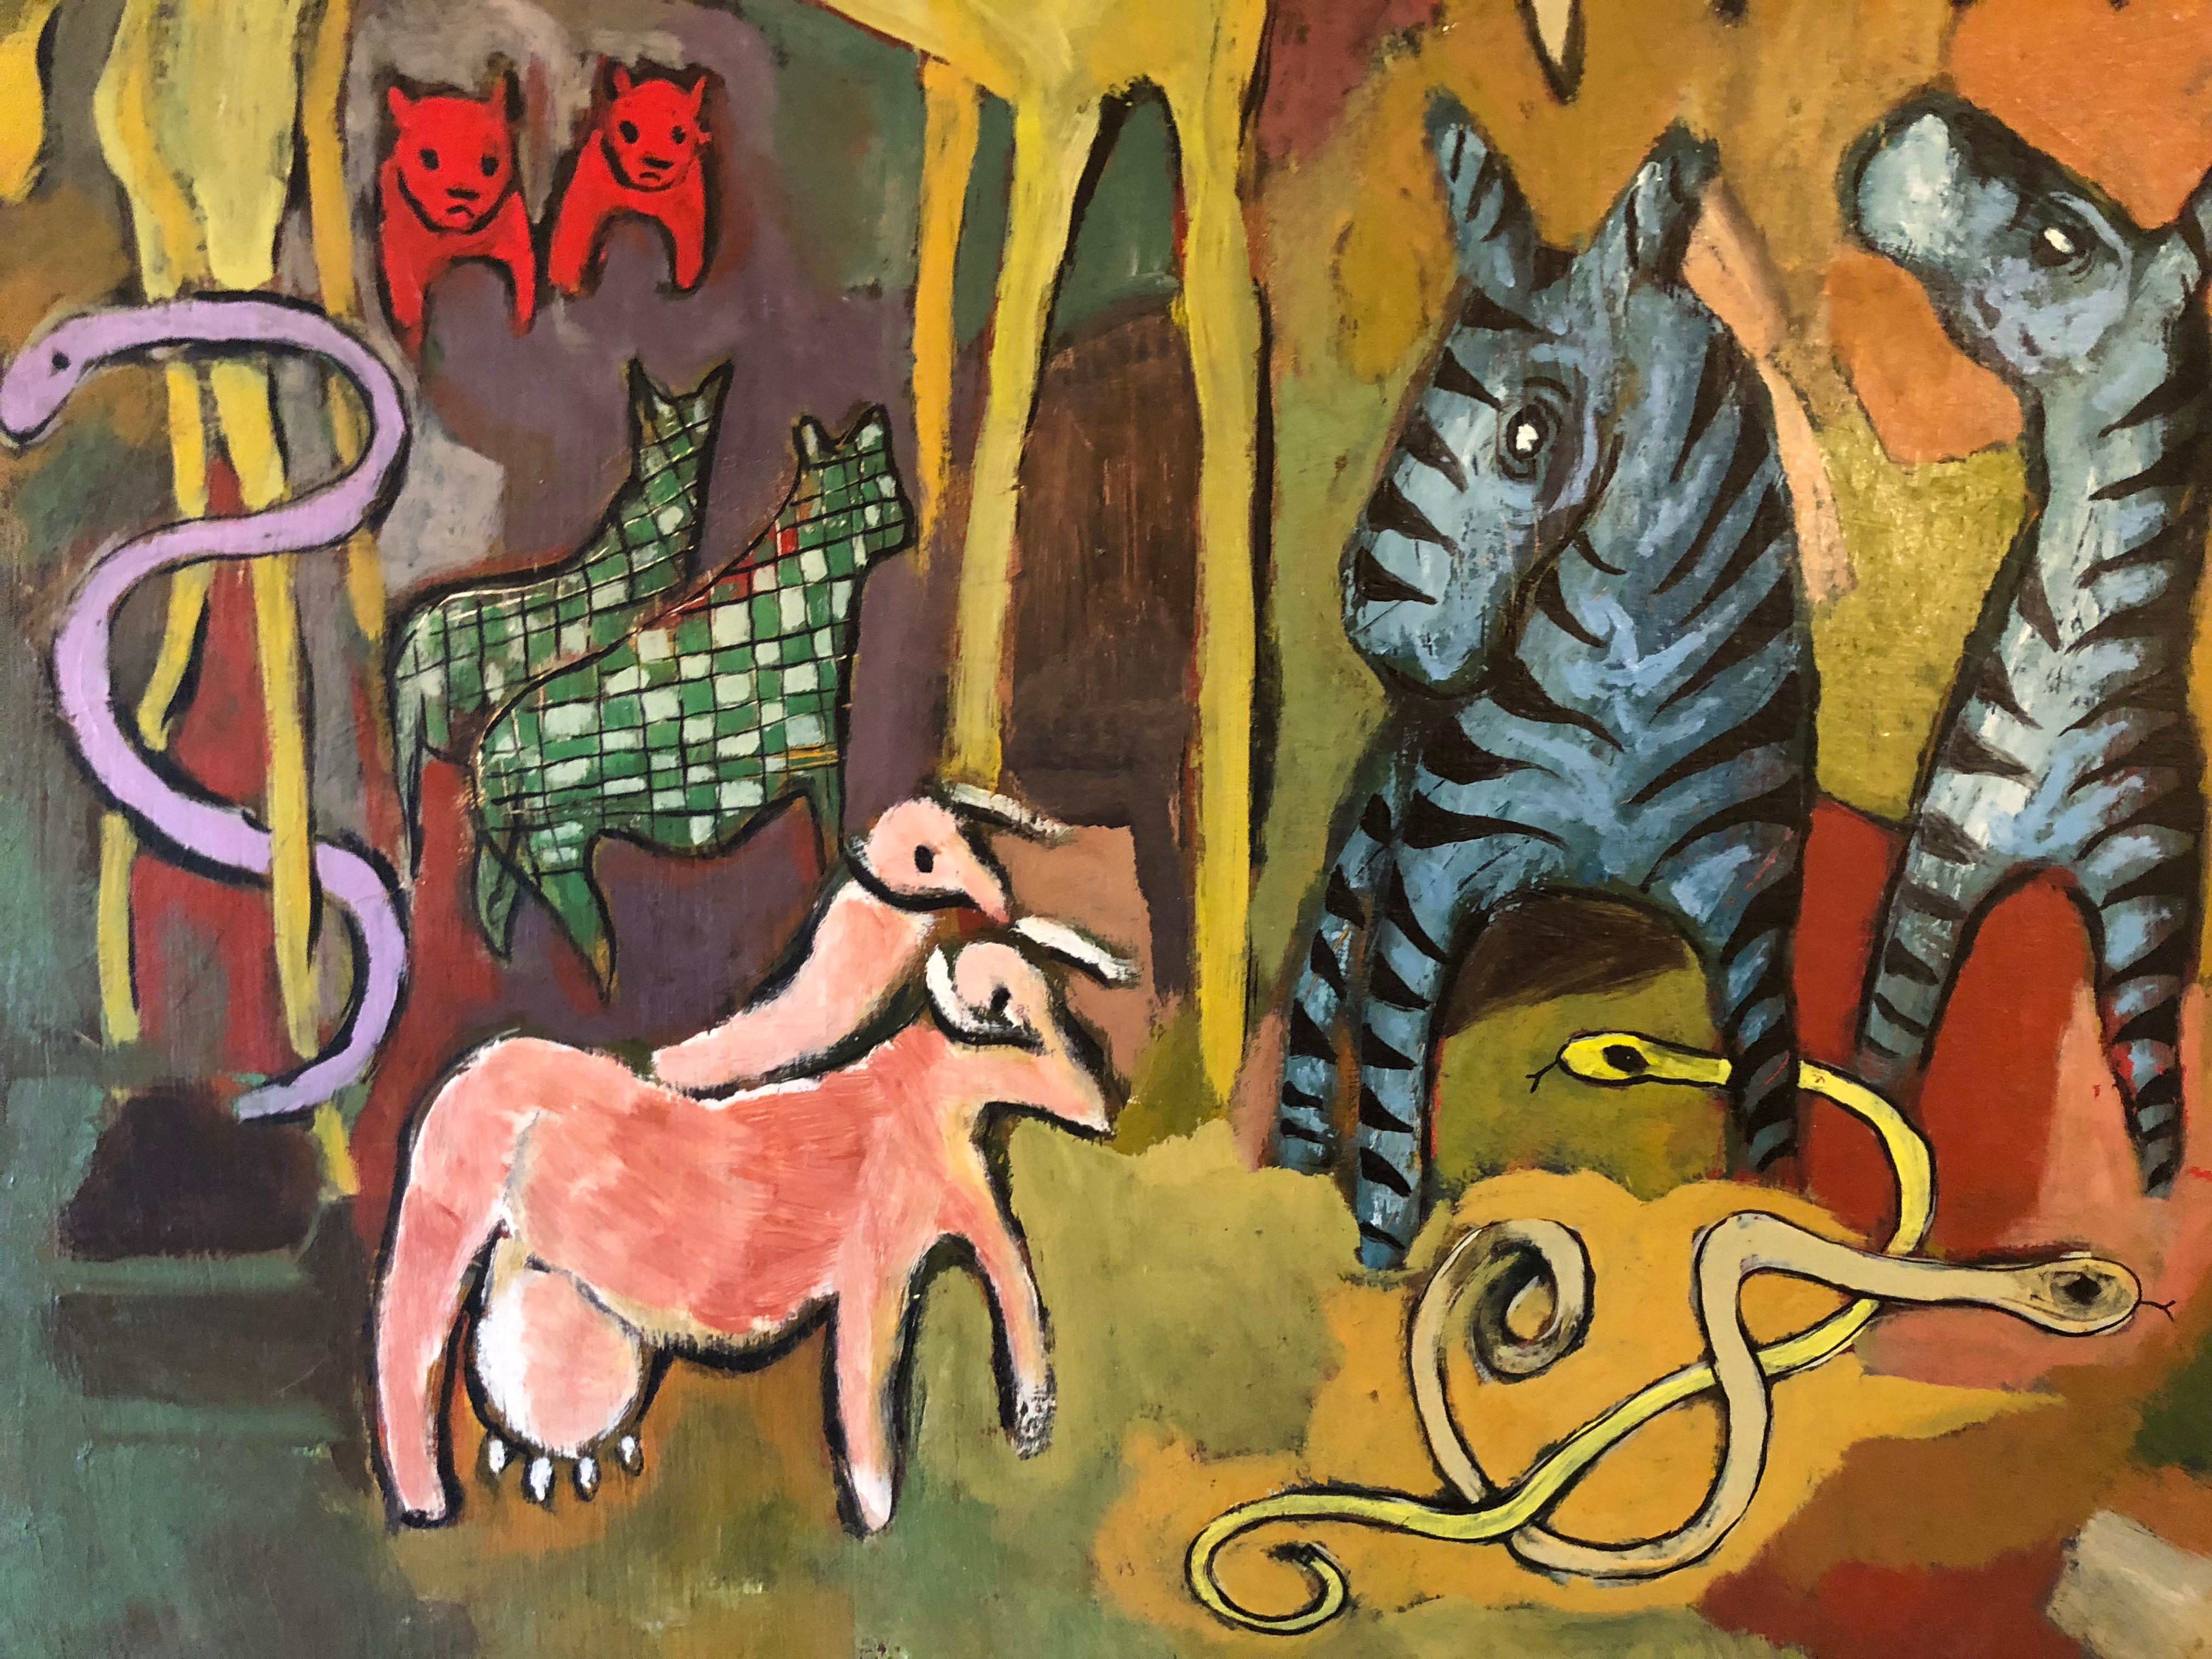 Charming 1950s modernist oil on masonite of Noah’s Ark. The use of color and expressive animals makes this a whimsical uplifting piece of art.